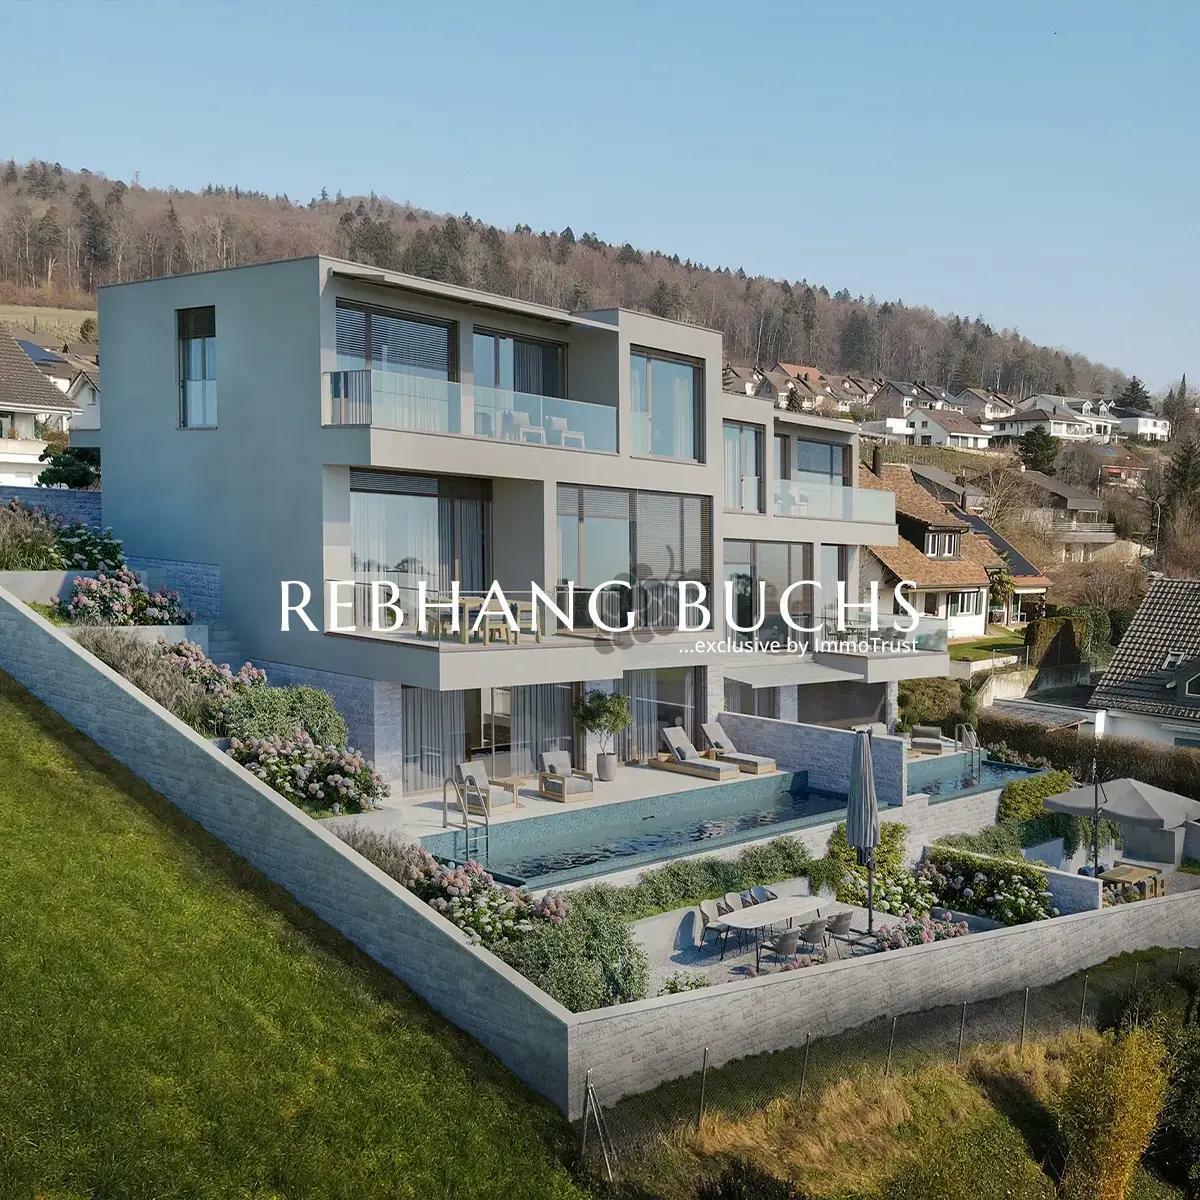 Rebhang Buchs real estate project